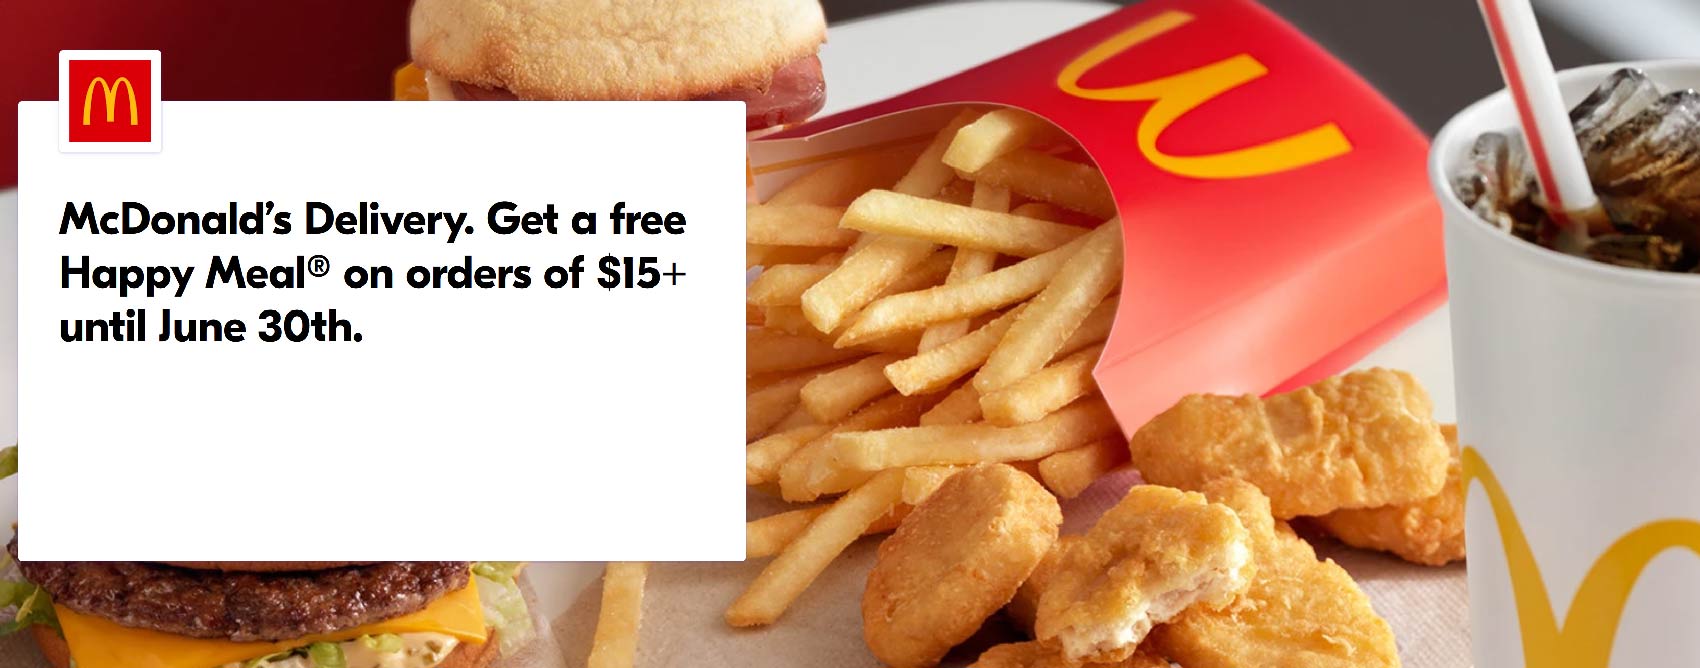 McDonalds restaurants Coupon  Free happy meal on $15 via delivery at McDonalds #mcdonalds 